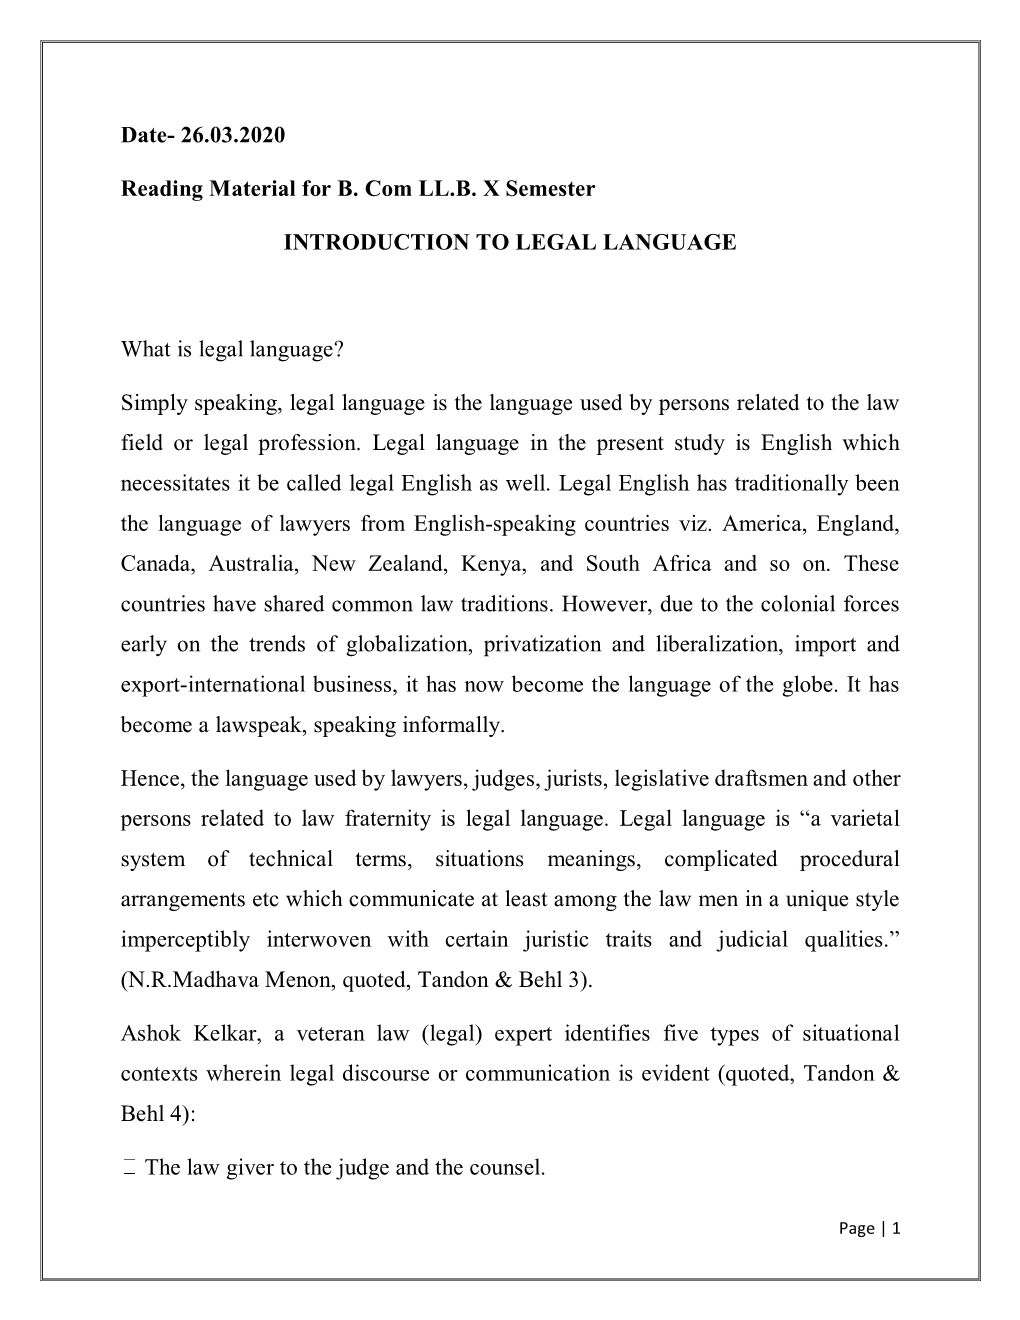 2. What Is Legal Language